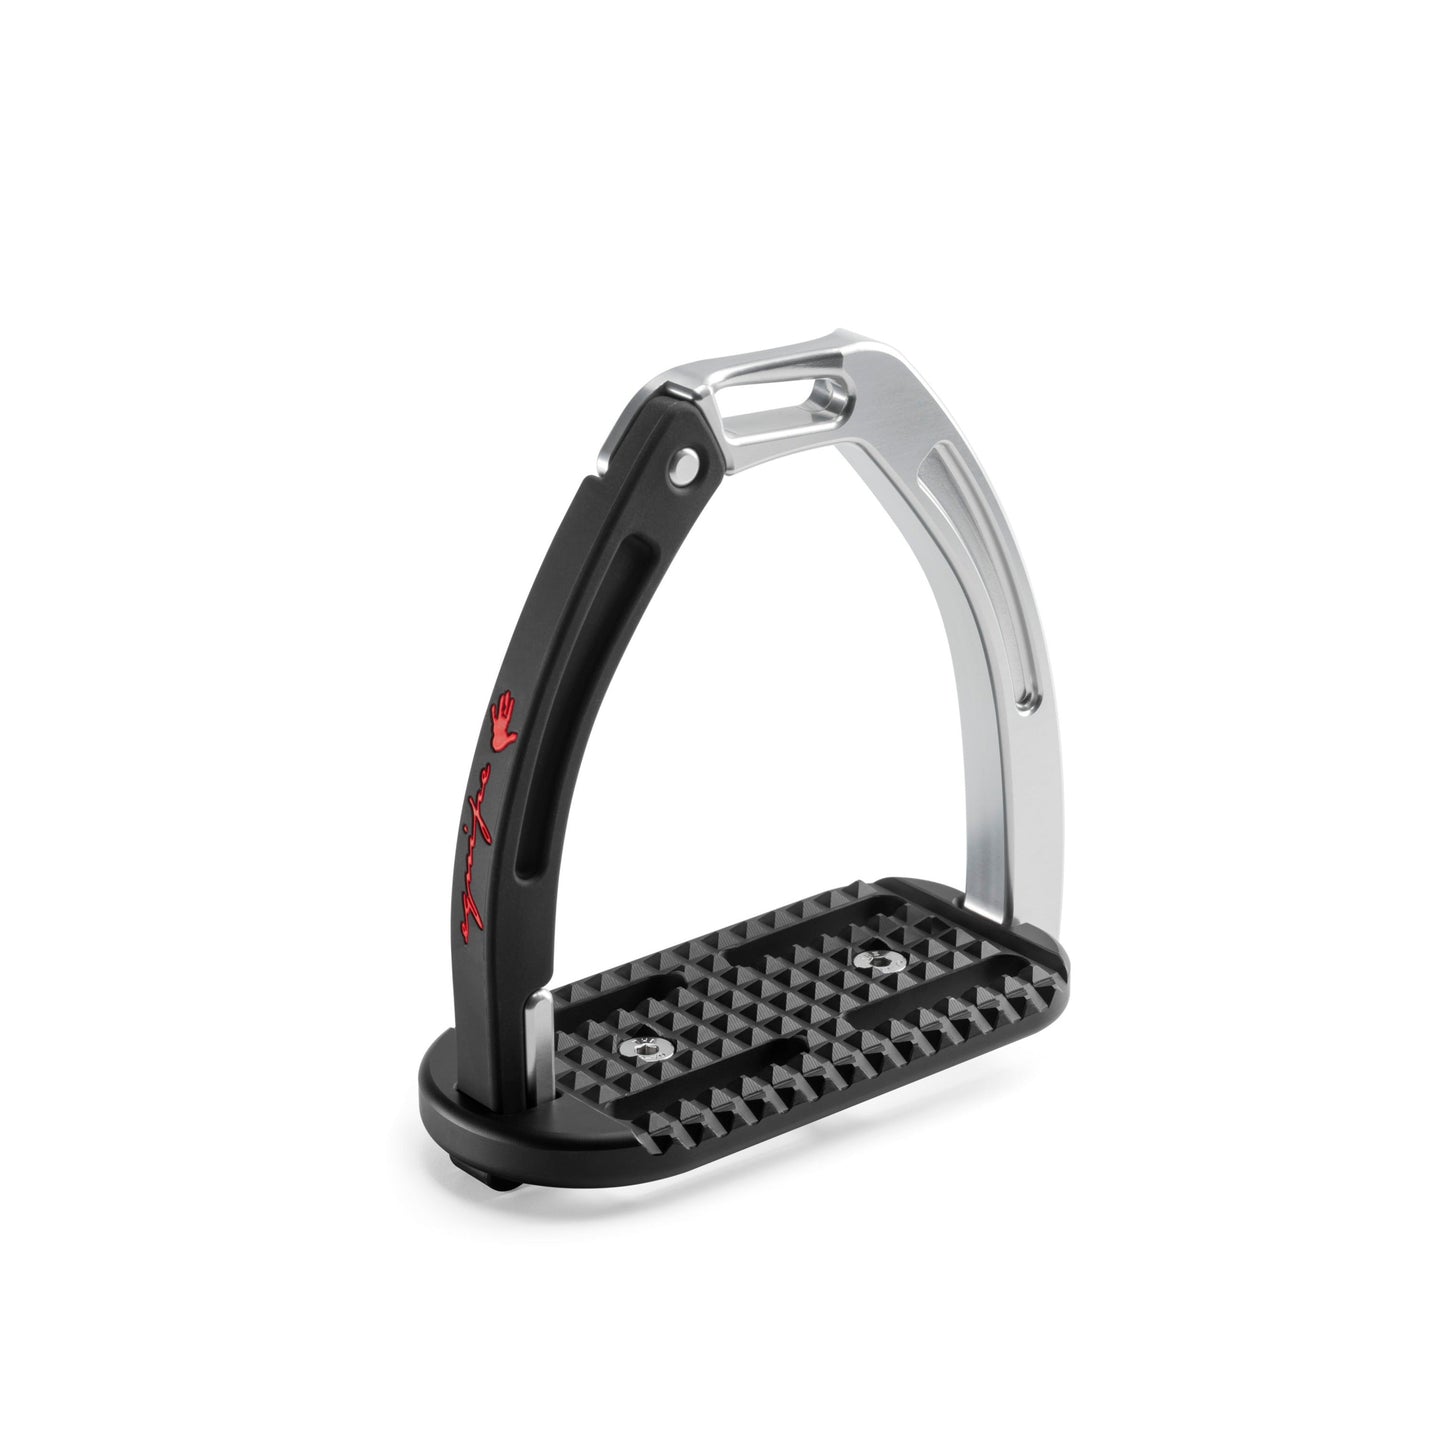 Modern black and silver stirrup leathers with grip tread on white background.